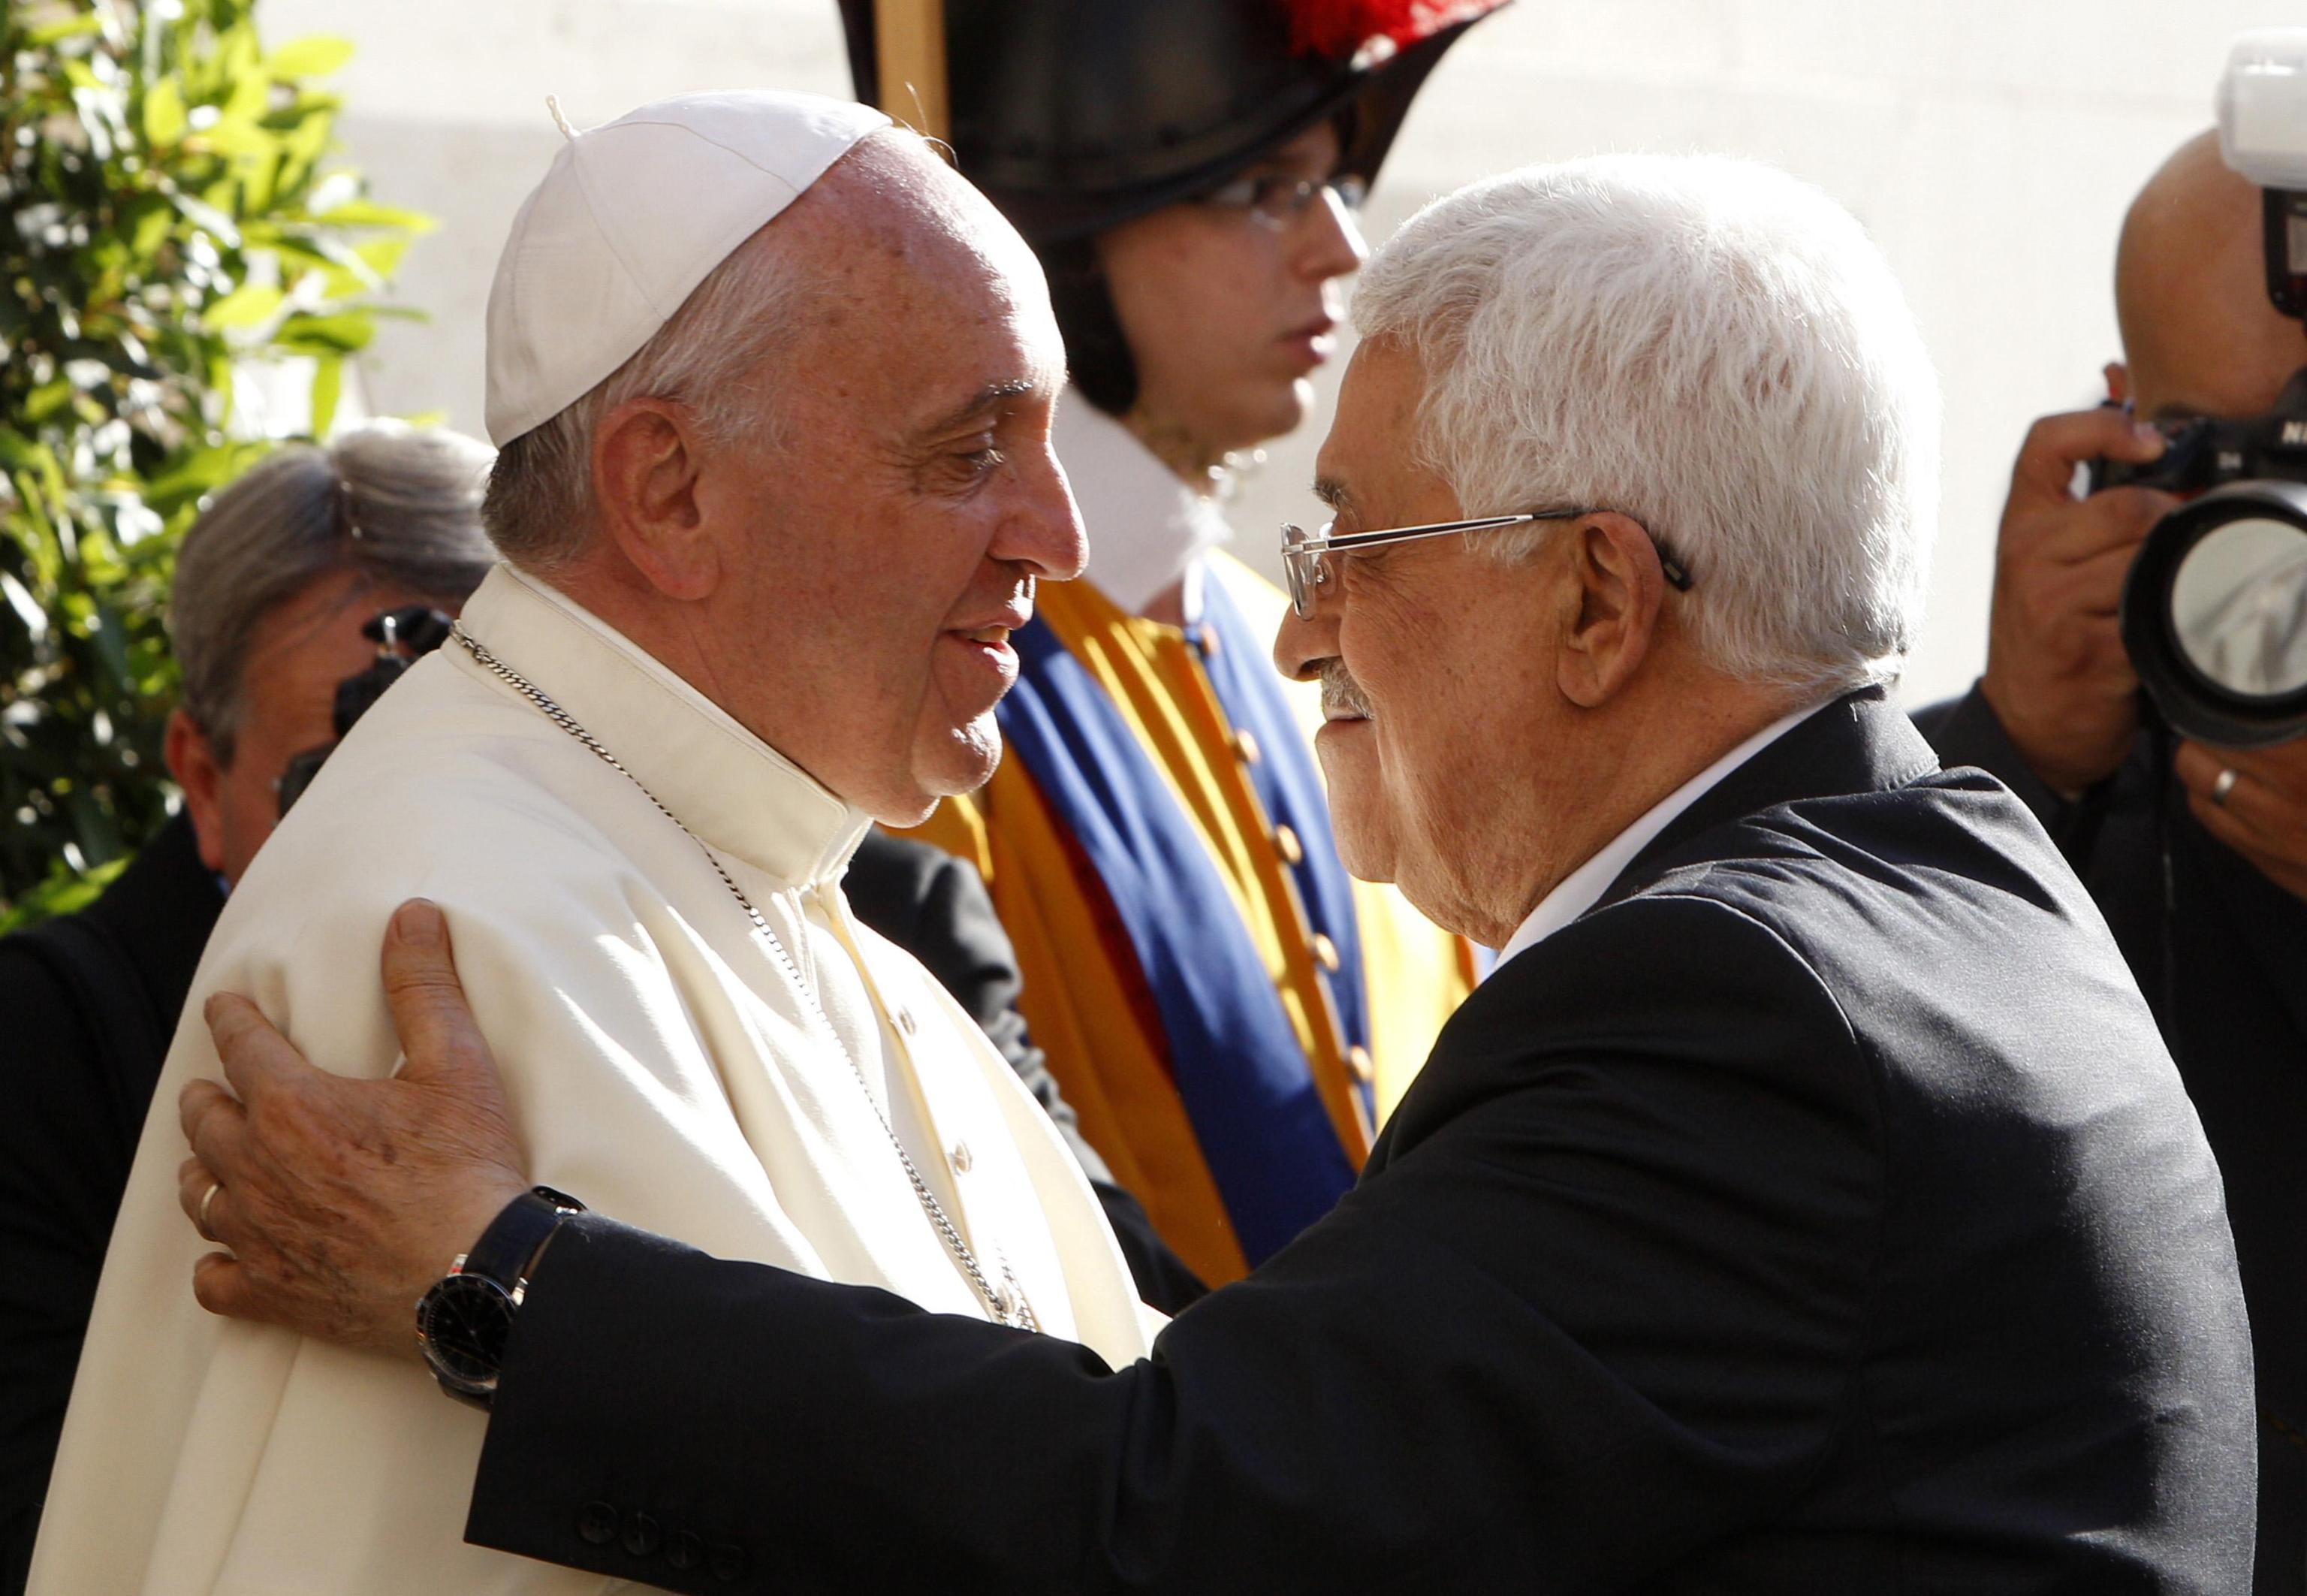 Pope Francis welcomes Palestinian President Abu Mazen (Mahmoud Abbas) at his arrival at the Vatican